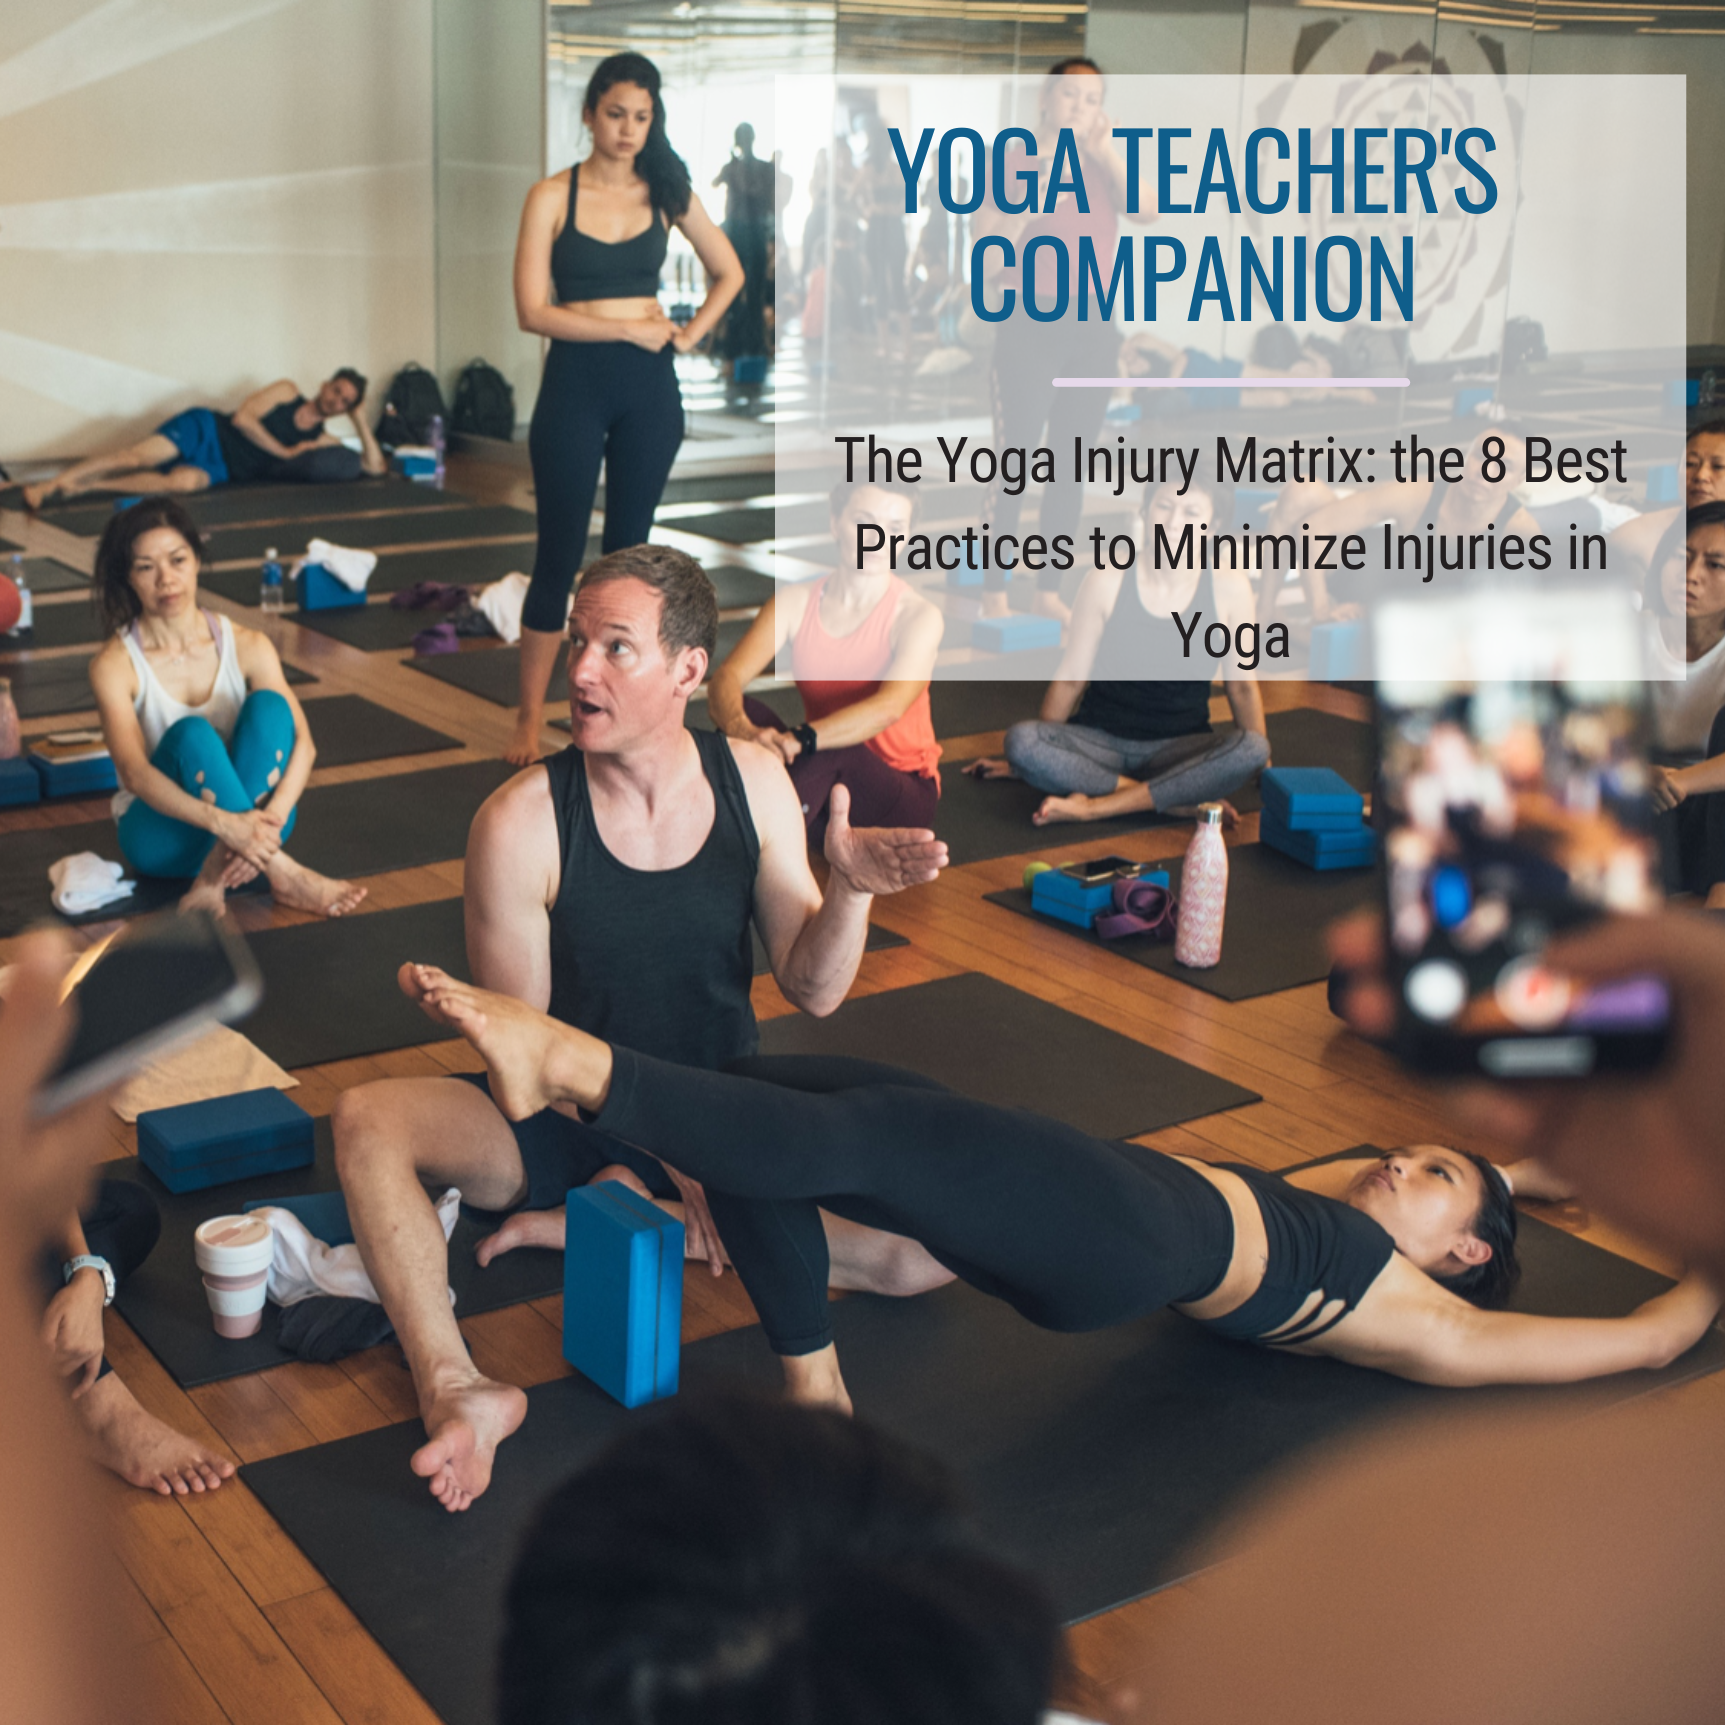 Yoga Teacher's Companion title card with Jason Crandell teaching a yoga class in the background, the title saying "The Yoga Injury Matrix: the 8 Best Practices to Minimize Injuries in Yoga"